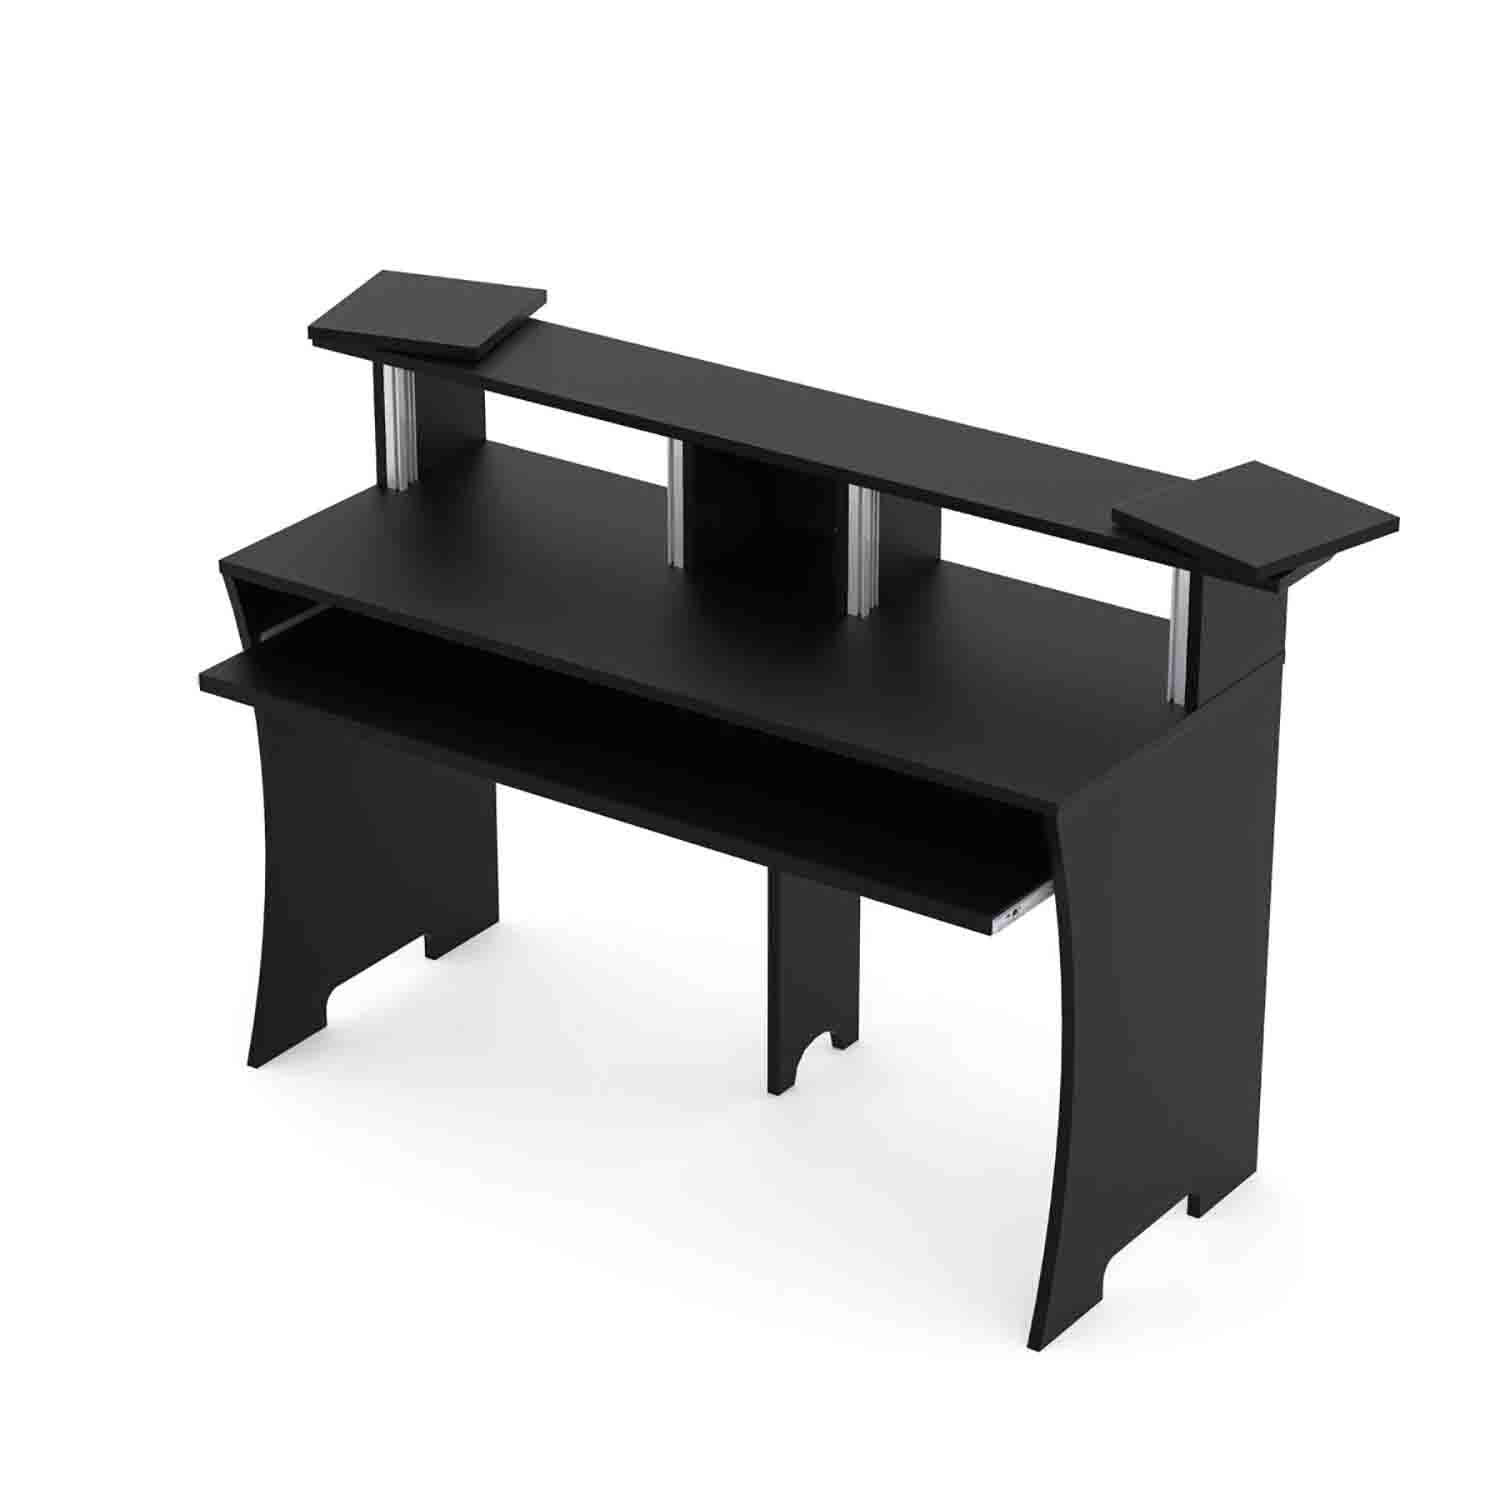 Glorious Workbench for Home and Project Studios - Black - Hollywood DJ